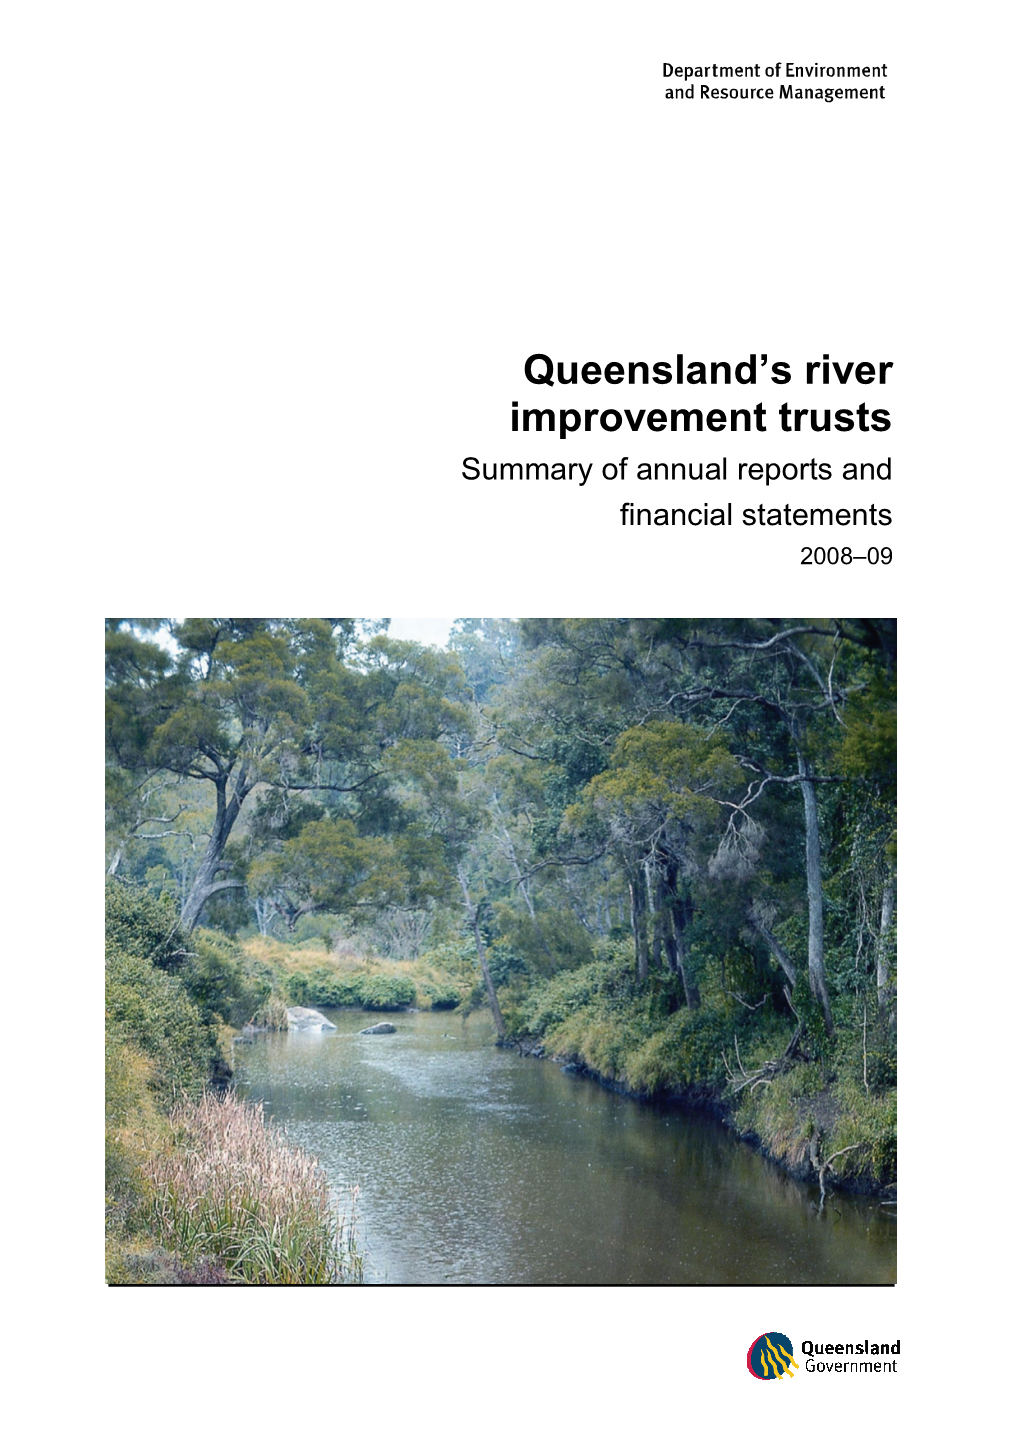 Queensland's River Improvement Trusts Summary of Annual Reports And